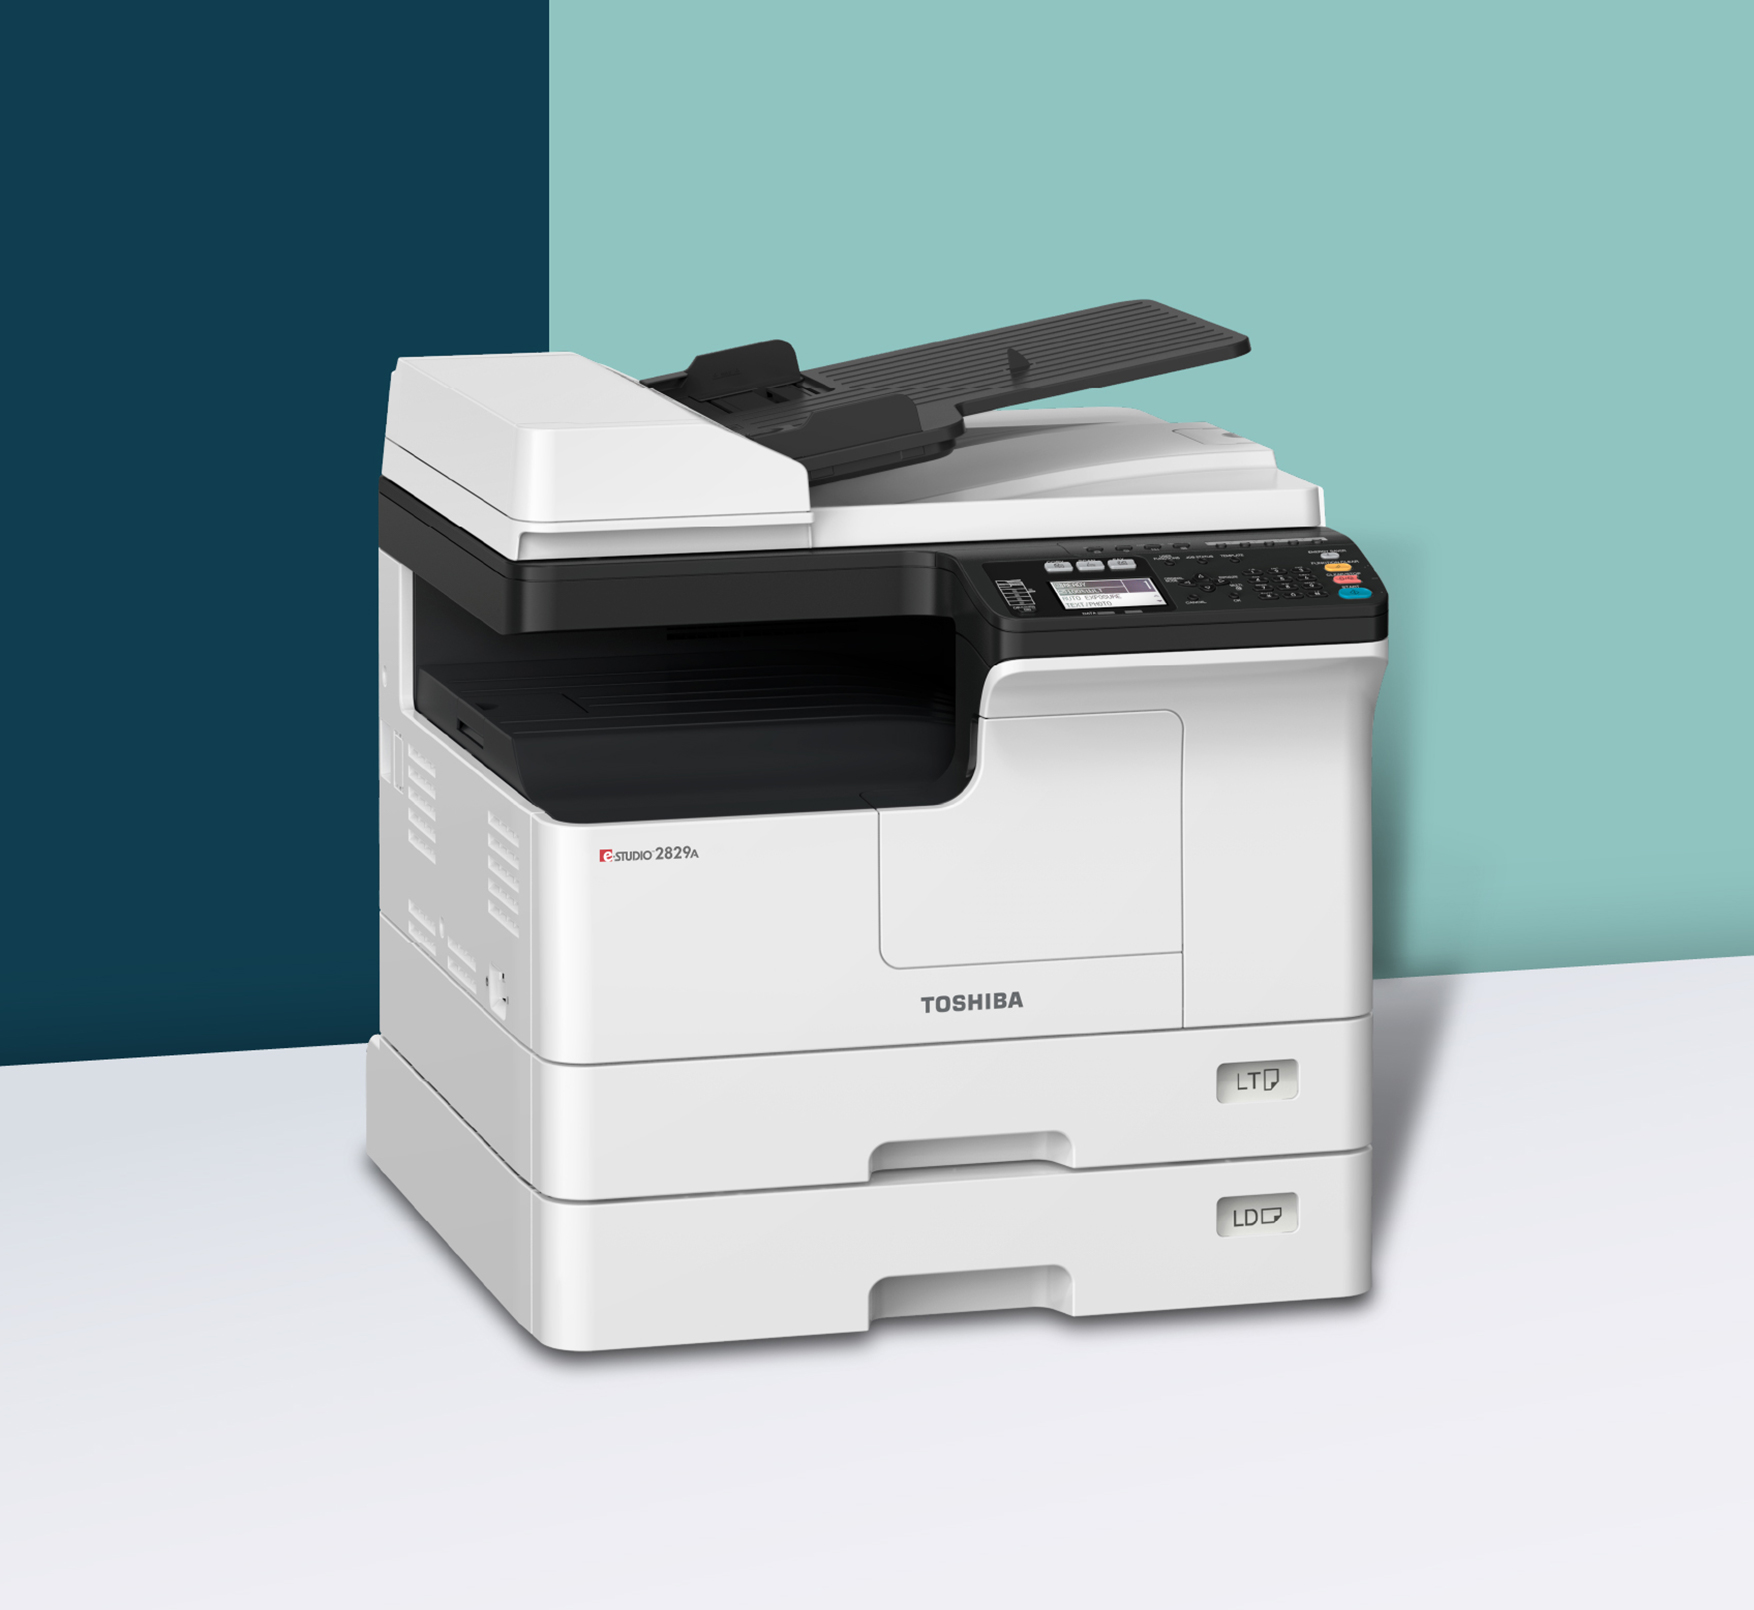 compact printers for home use